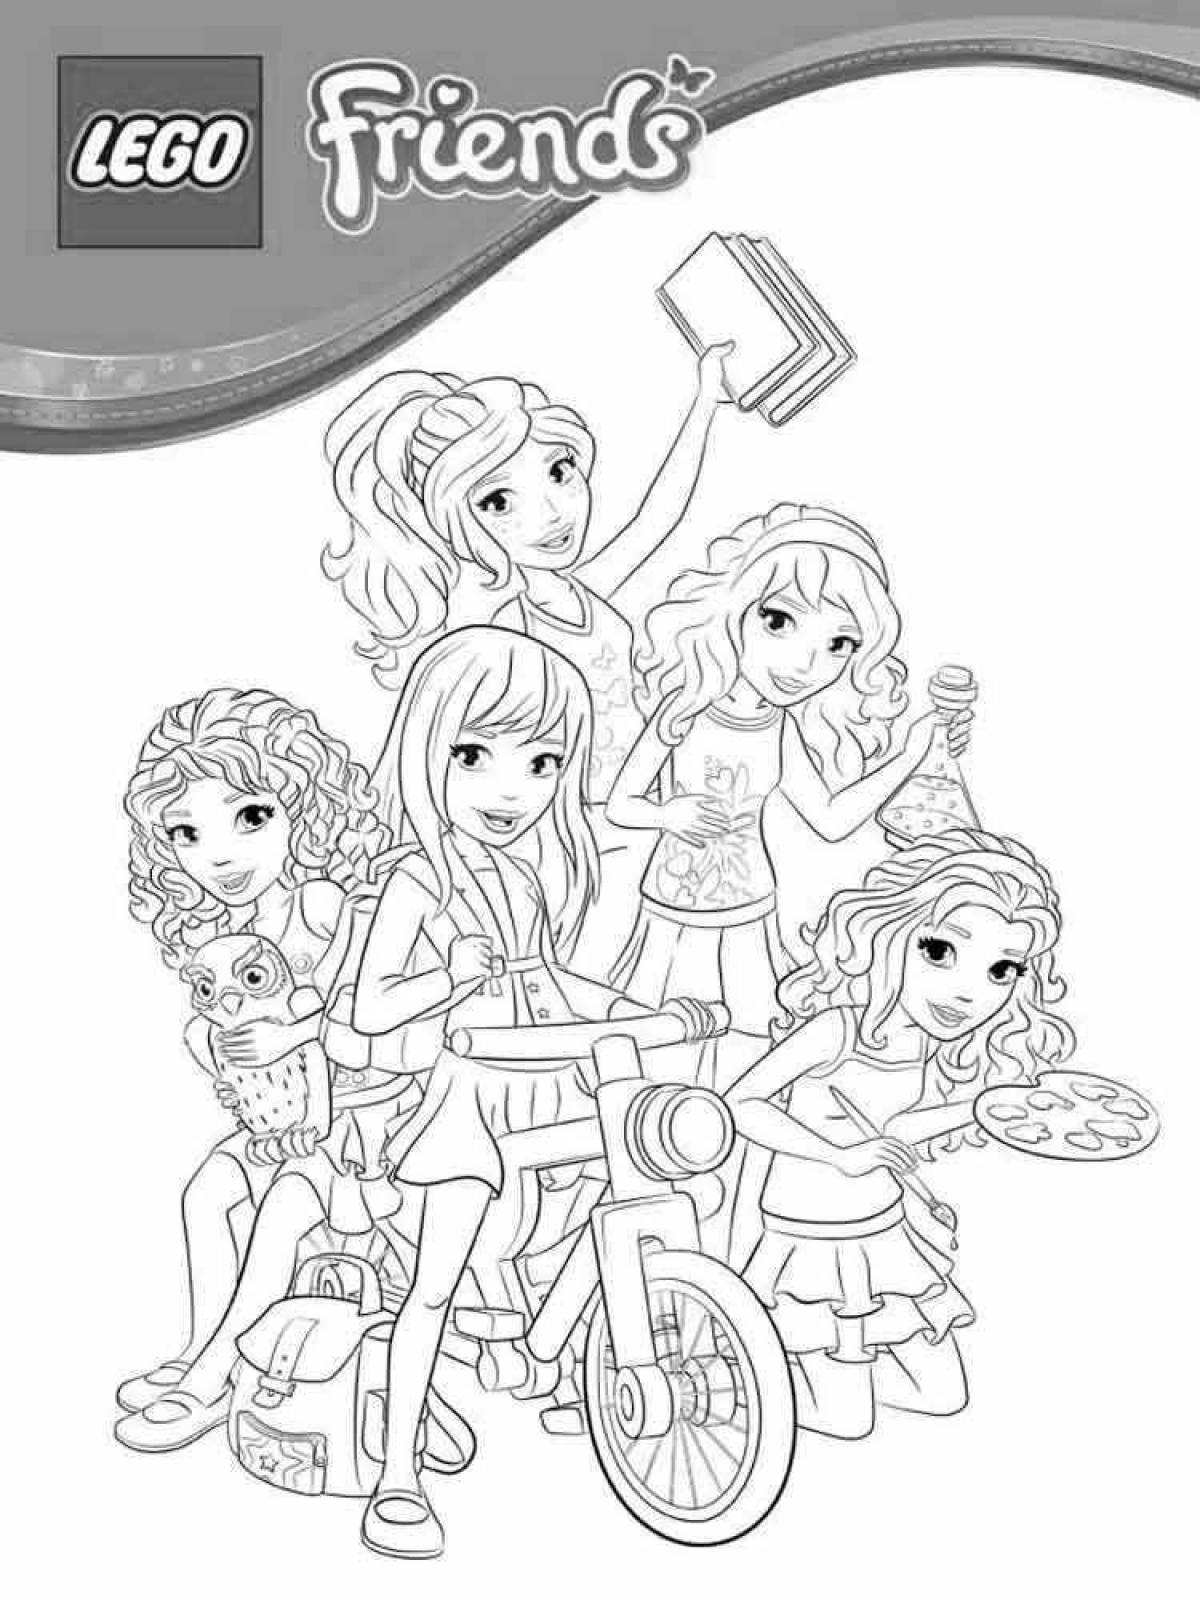 Adorable ramble friends coloring page